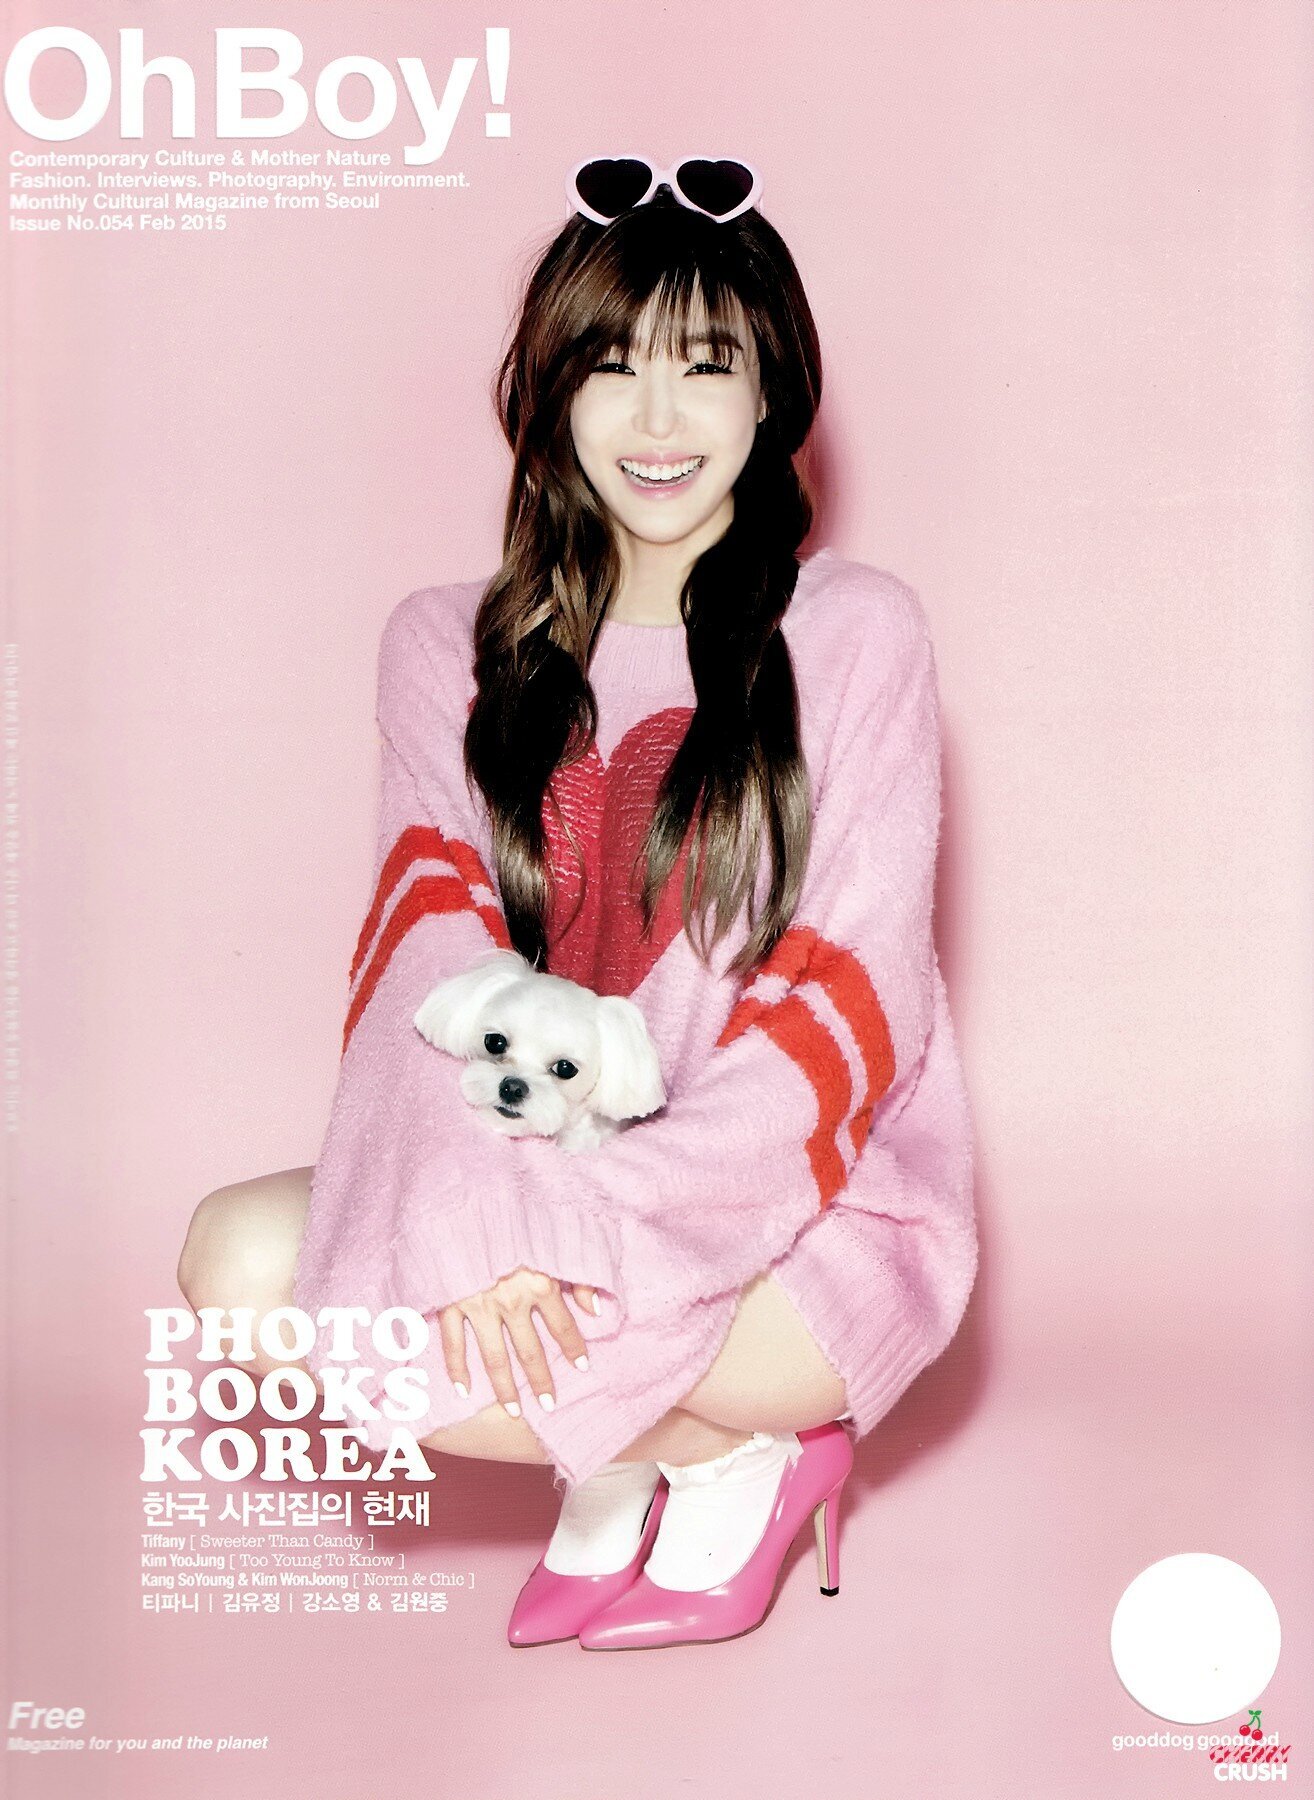 [SCANS] Tiffany for Oh!BOY Magazine February 2015 issue | kpopping